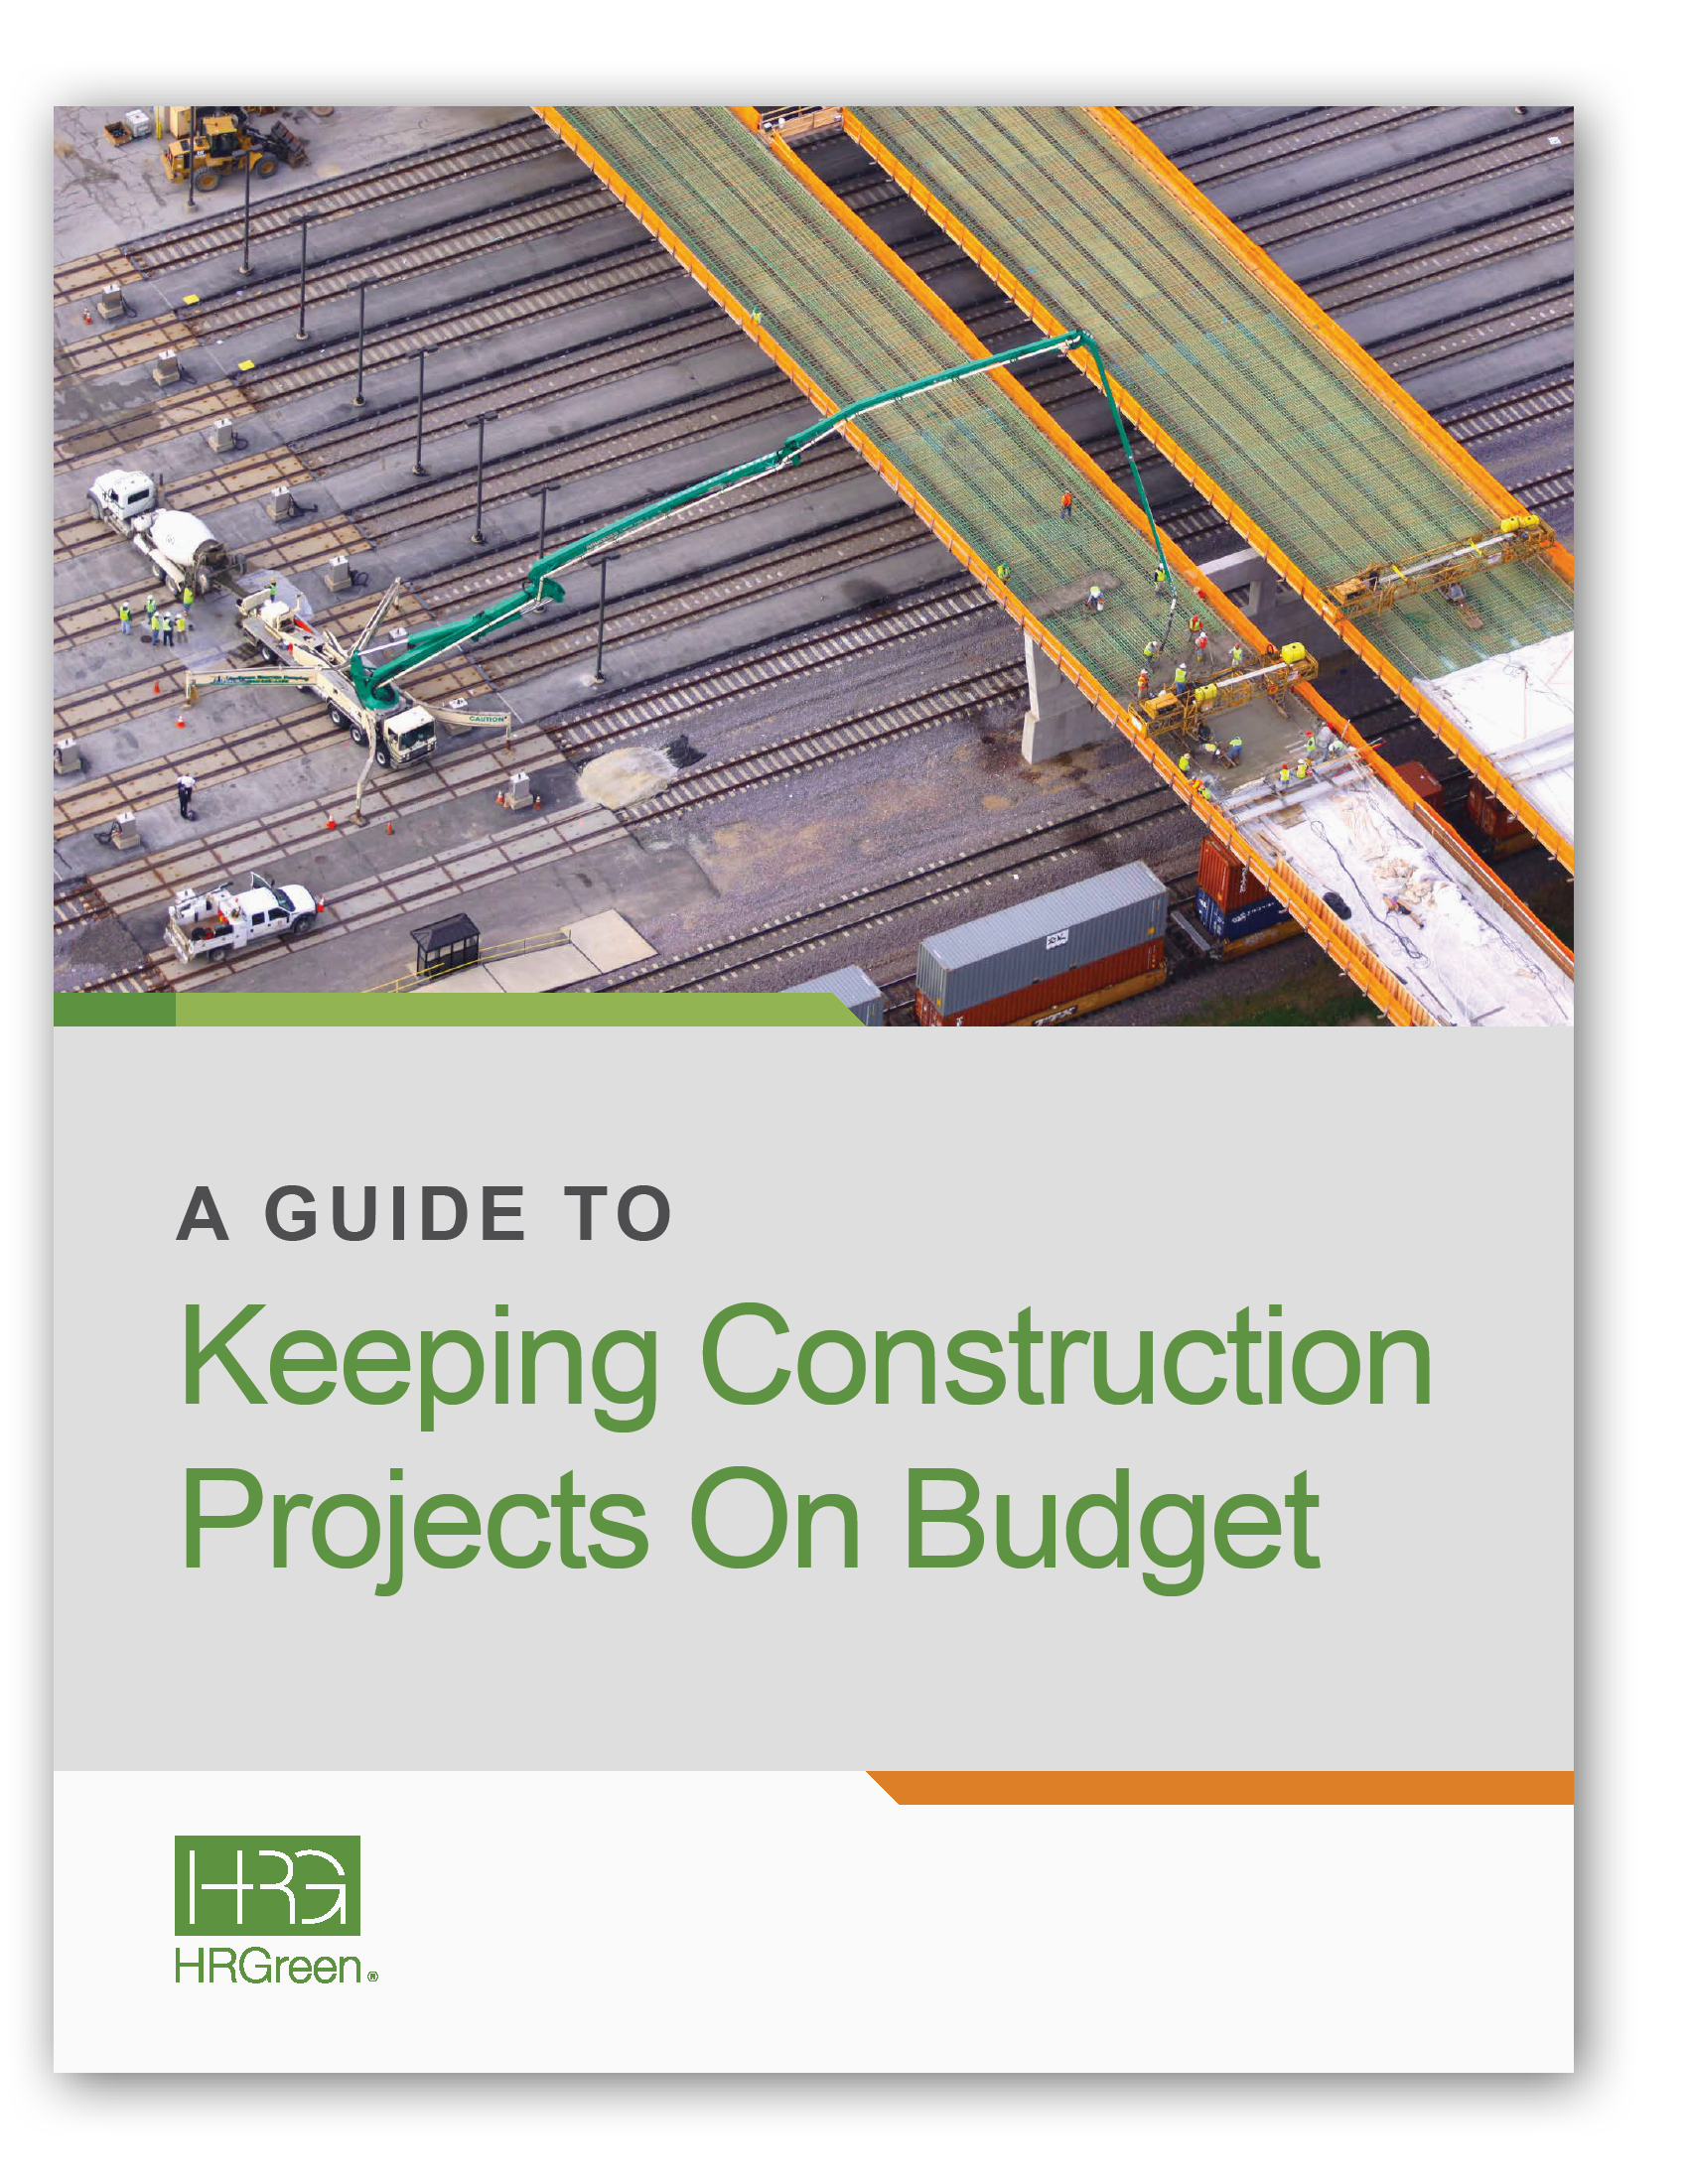 HRG-Construction-Guide-Cover